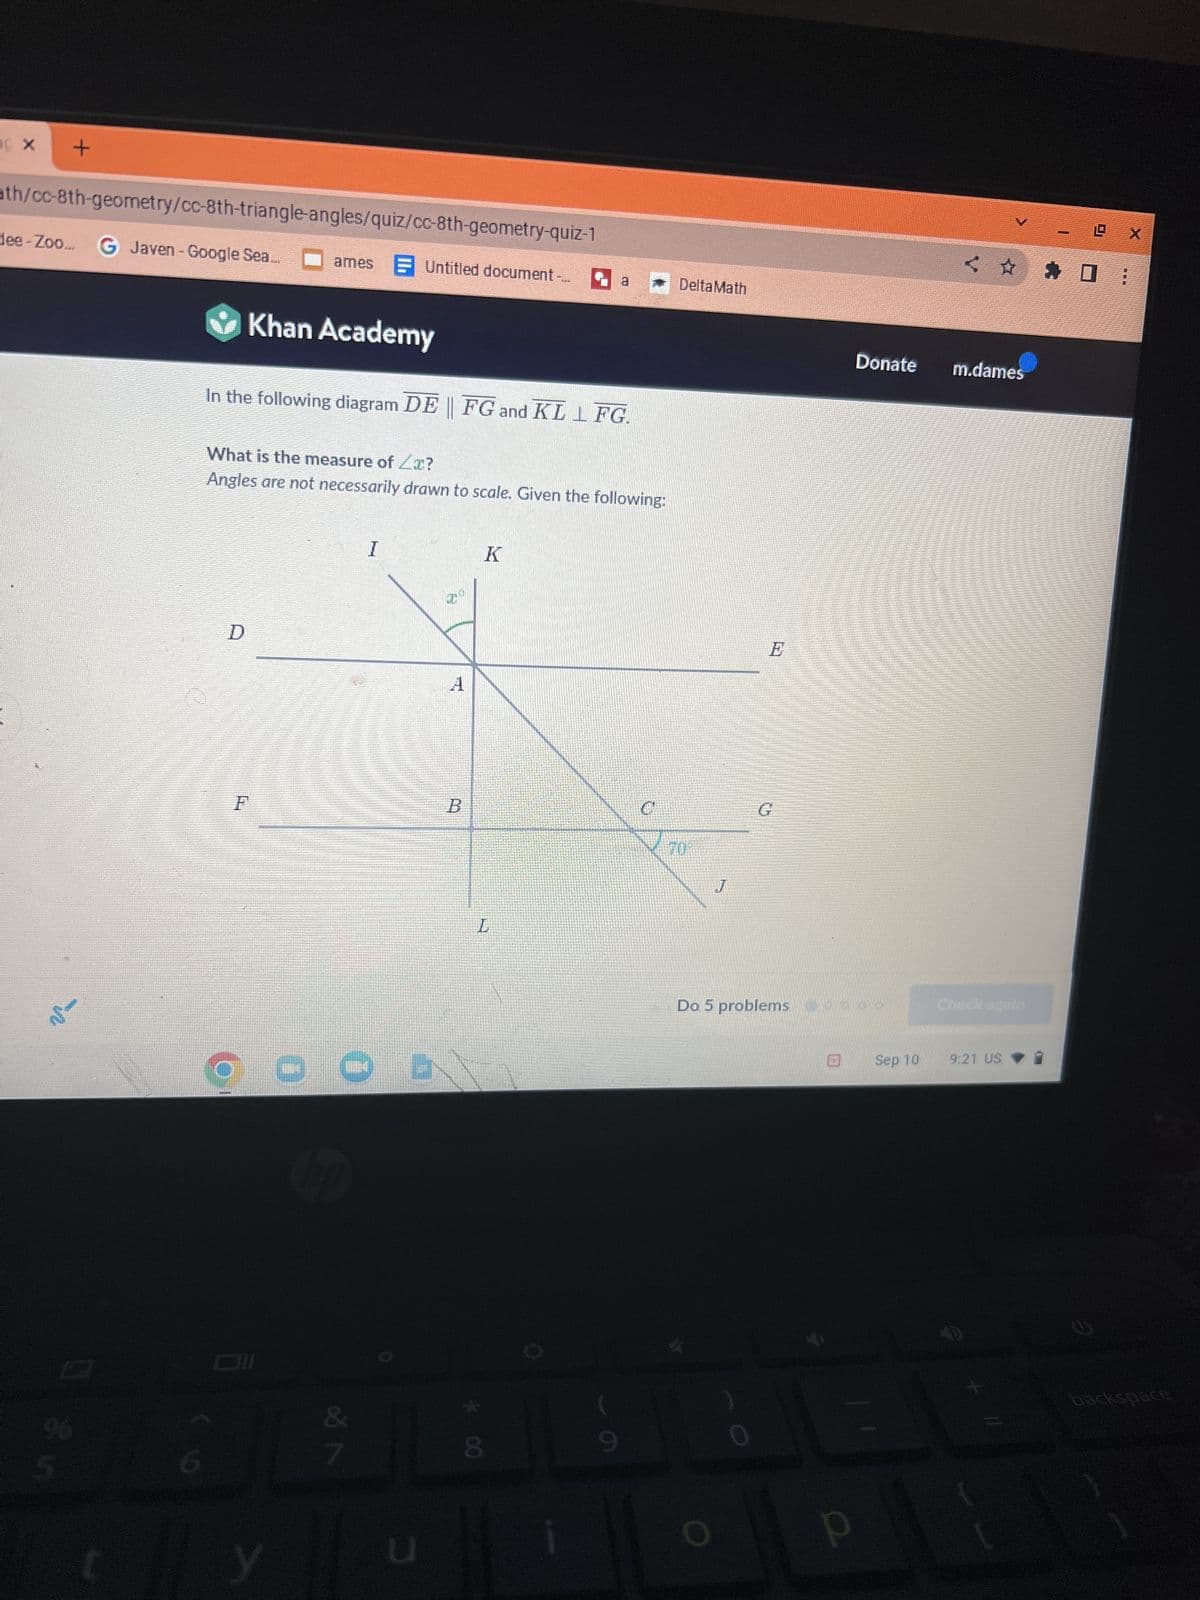 X
+
ath/cc-8th-geometry/cc-8th-triangle-angles/quiz/cc-8th-geometry-quiz-1
dee-Zoo... G Javen - Google Sea.
0 865
D
Khan Academy
In the following diagram DE || FG and KL LFG.
F
ames Untitled document-
What is the measure of Zx?
Angles are not necessarily drawn to scale. Given the following:
20
y
I
Ob
&
7
u
200
1
B
a
K
L
8
C
DeltaMath
70
J
O
E
G
Do 5 problems
< ☆
Donate m.dames
Sep 10
9:21 US
-X
◆
O
☐ :
2
backspace
M